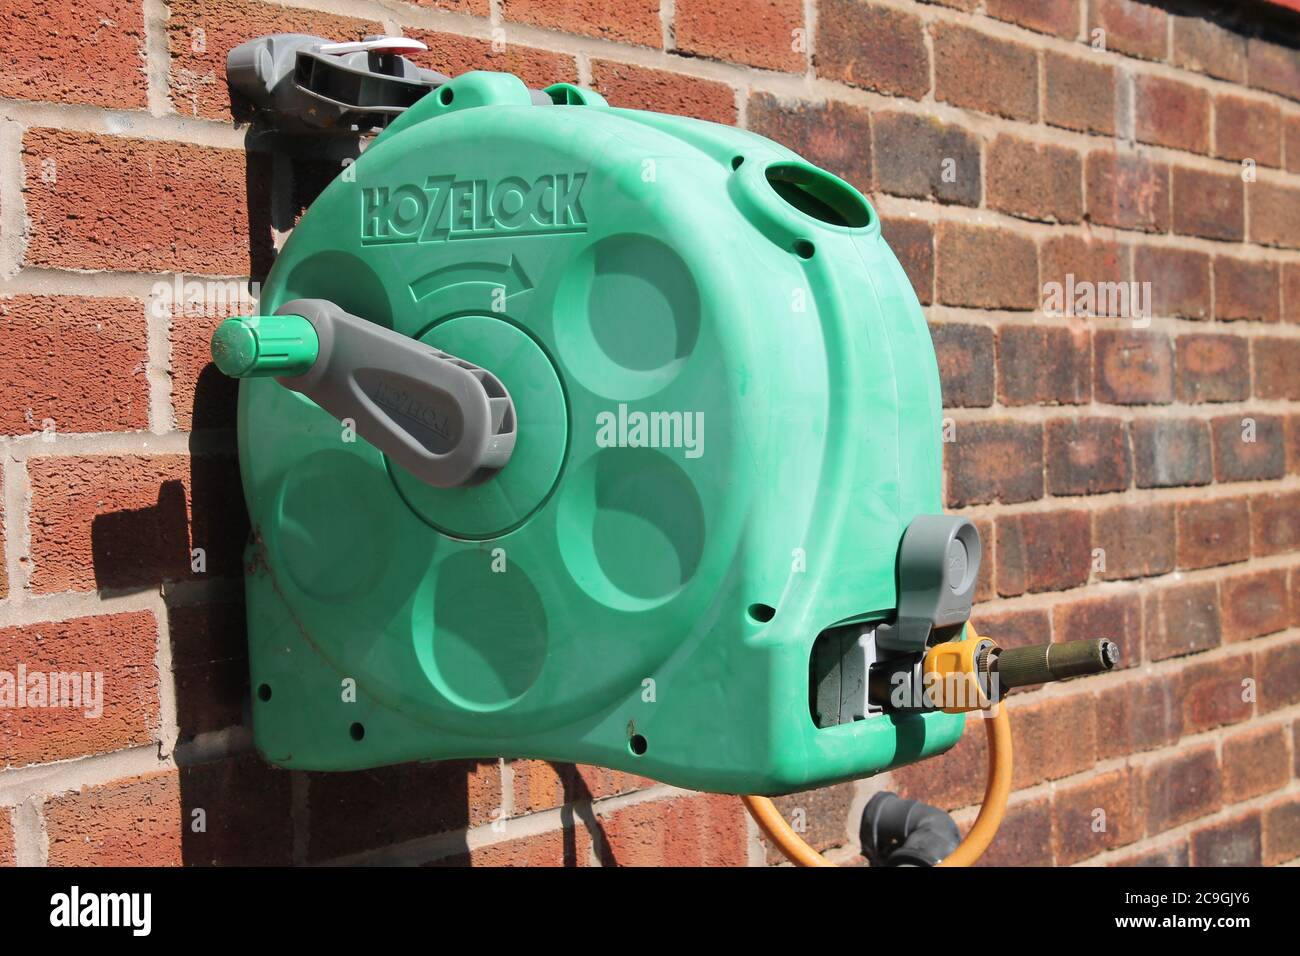 https://c8.alamy.com/comp/2C9GJY6/hose-reel-tidy-mounted-outside-on-domestic-wall-2C9GJY6.jpg